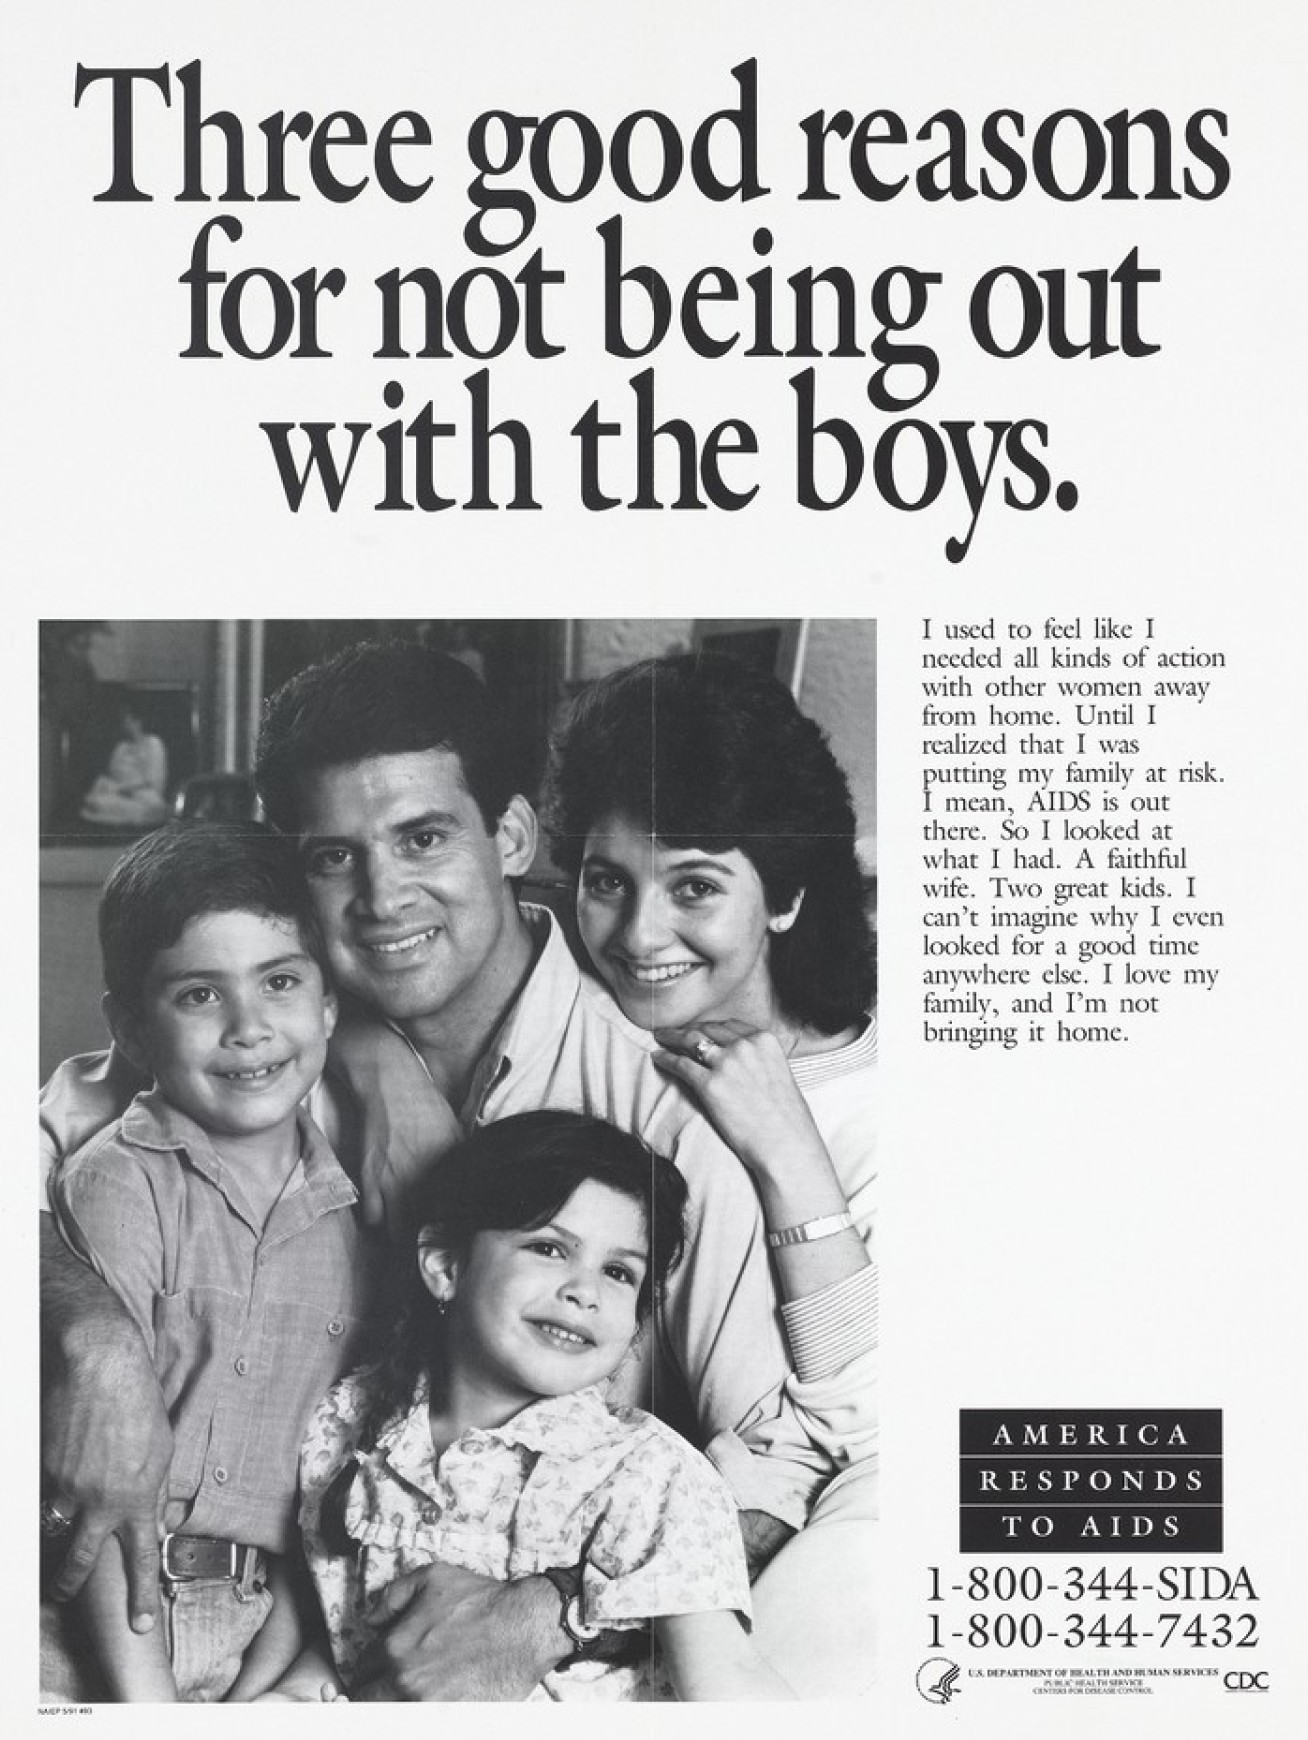 A man with his wife and two sons with a message about the importance of being faithful to his wife to avoid putting his family at risk from AIDS; a poster from the America responds to Aids advertising campaign. Lithograph, 1991.